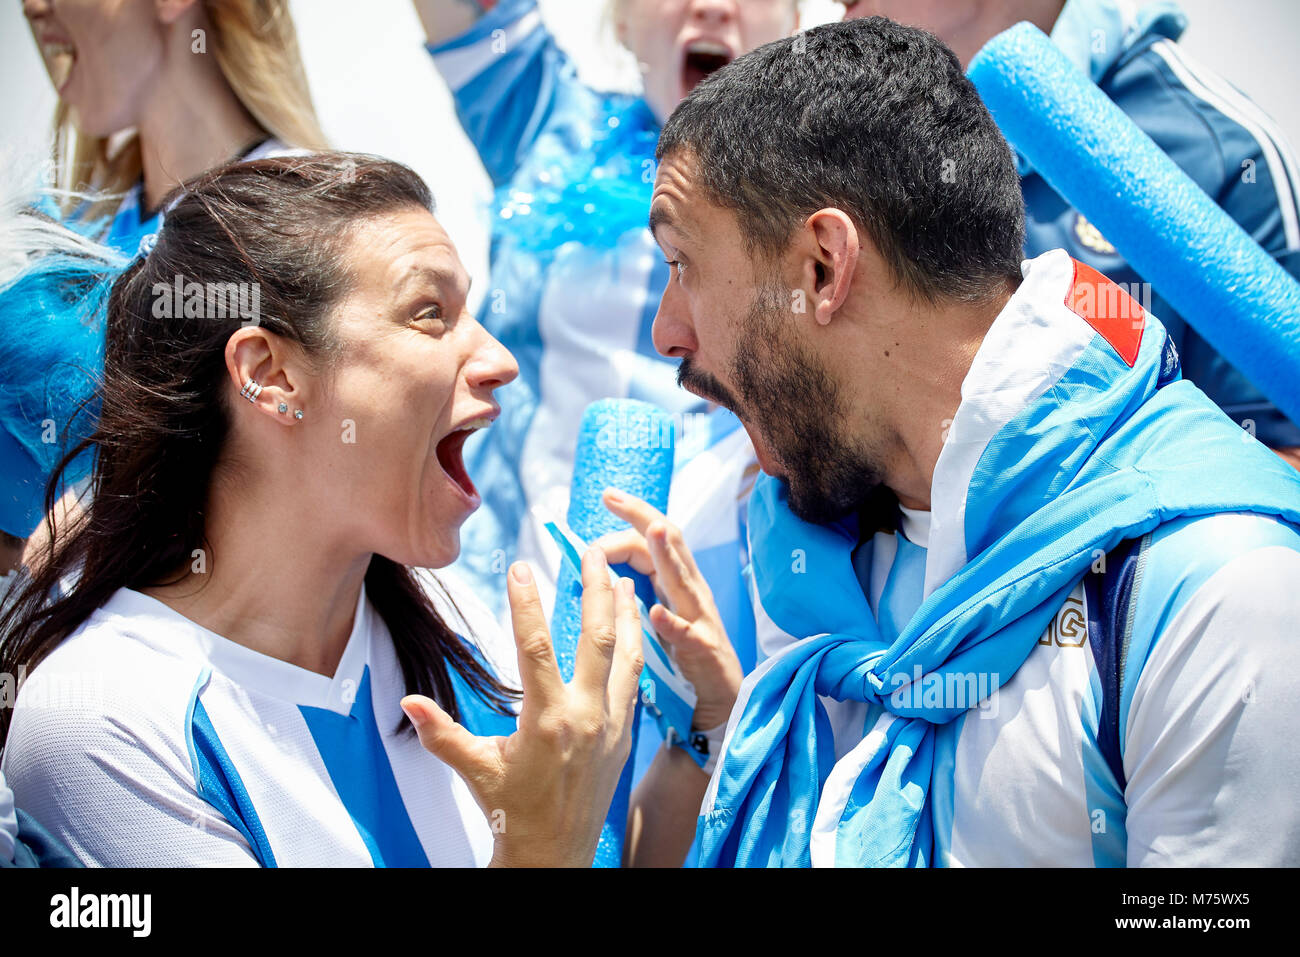 Argentinian football fans shouting excitedly at match Stock Photo